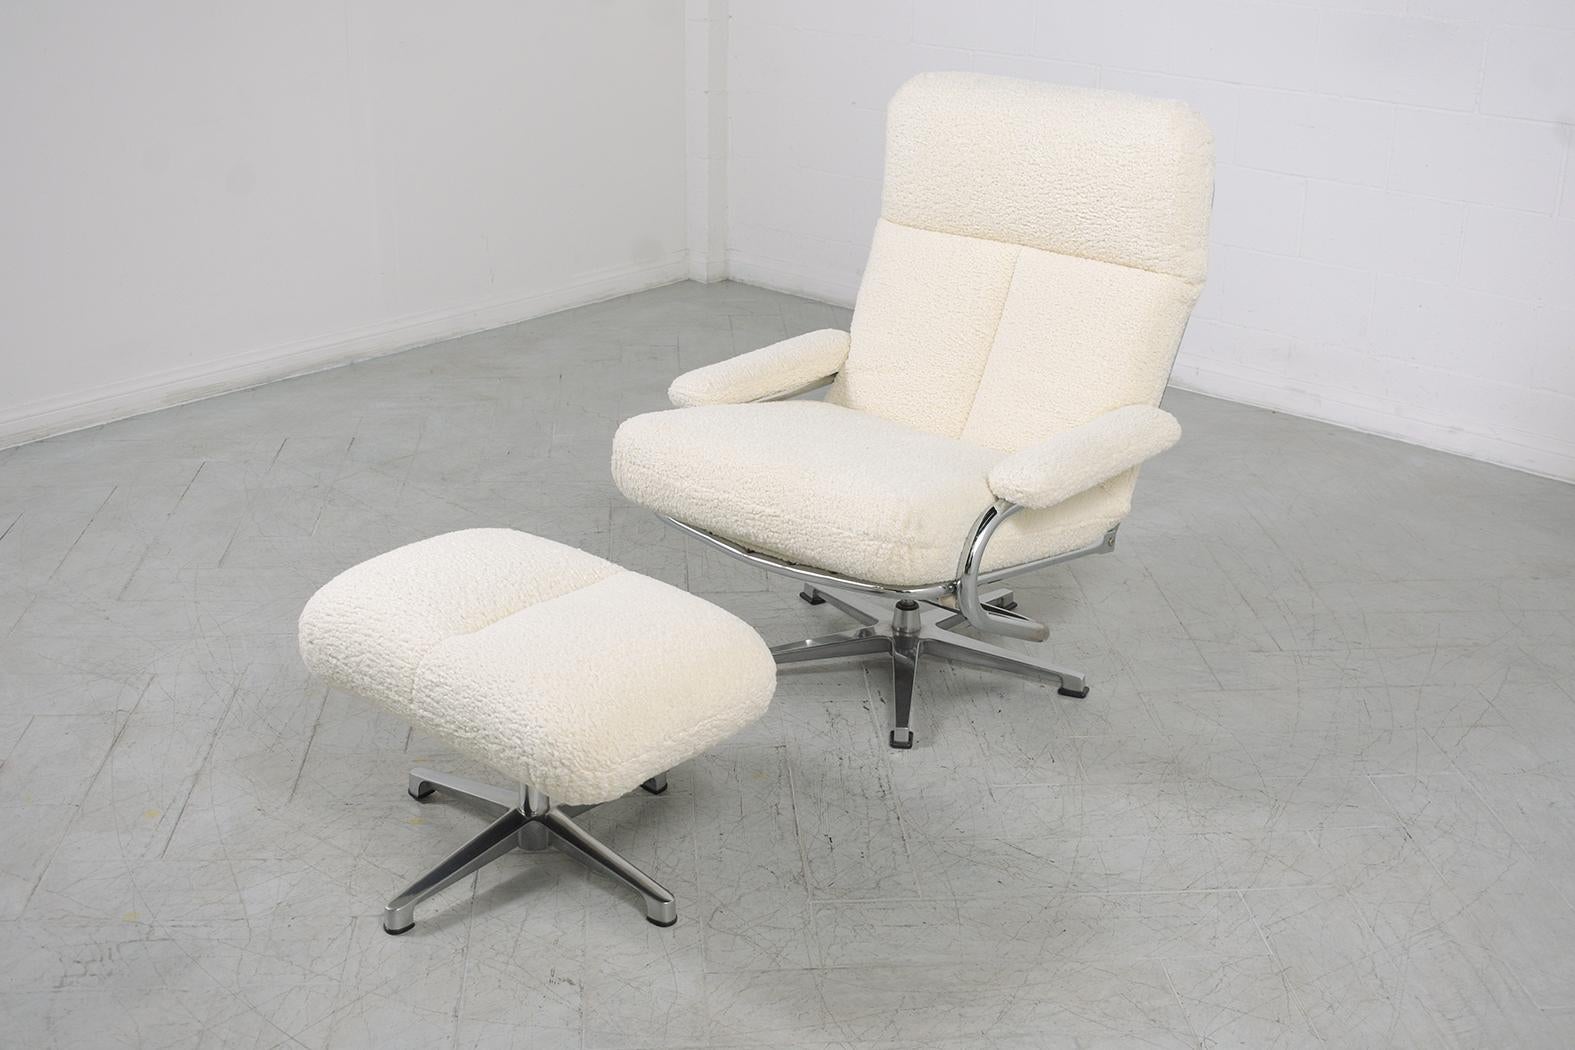 1970s Chrome-Plated Recliner Chair & Ottoman: Mid-Century Modern Revived For Sale 1